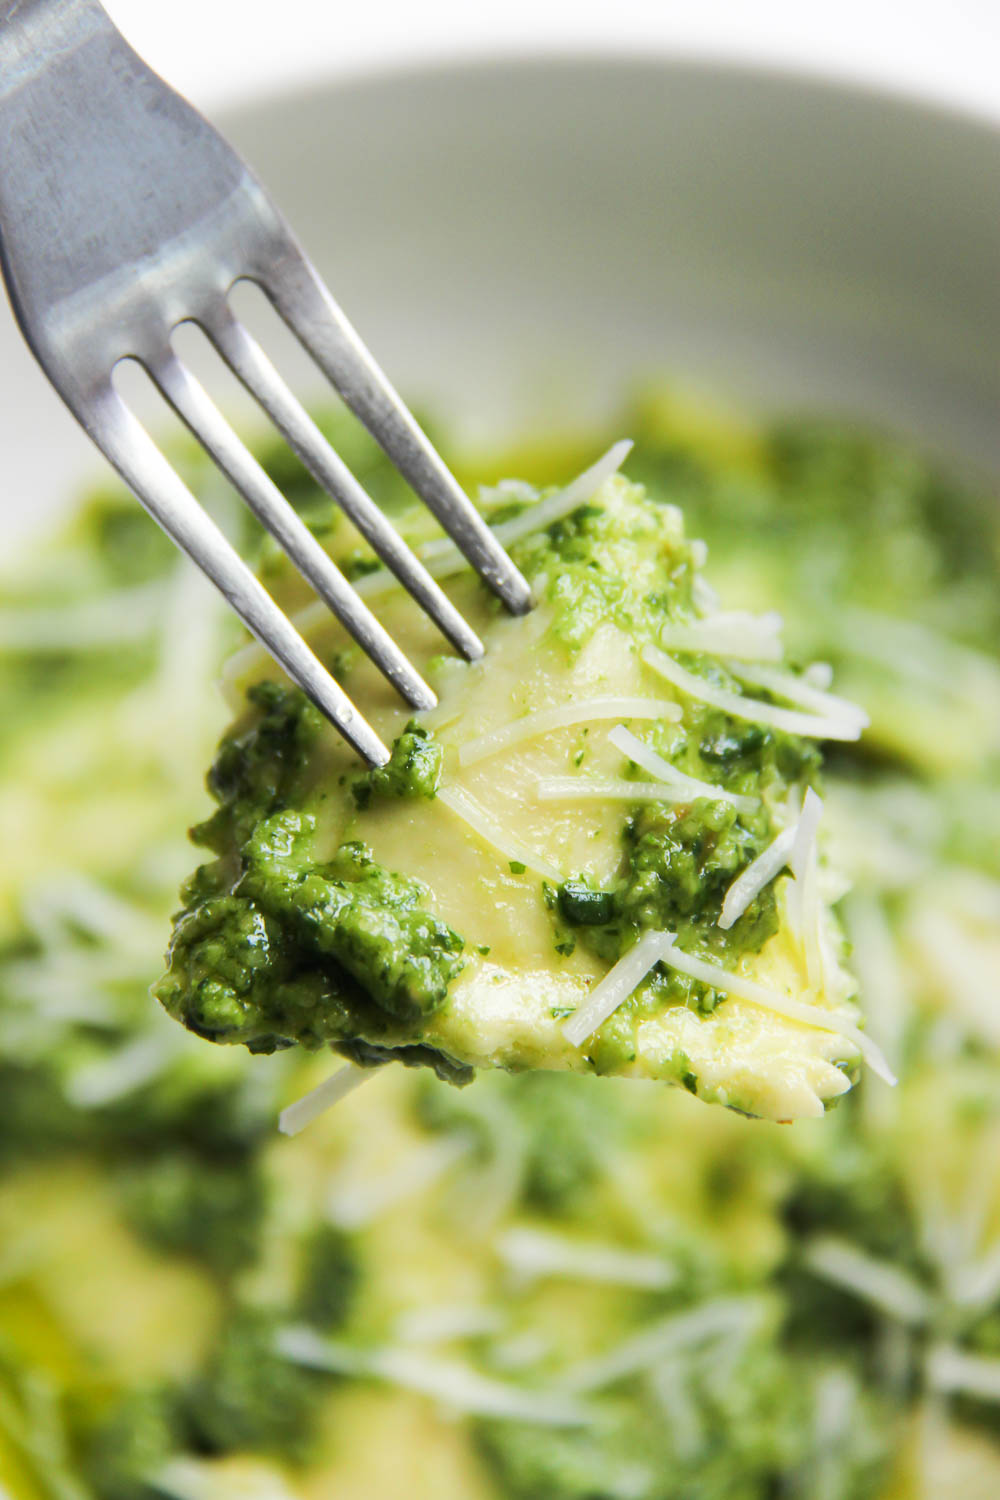 This Gluten-free Spinach and Cheese Ravioli comes together in less than an hour, including prep and cook time – perfect and delicious weeknight meal. Try this today and enjoy a hearty meal!